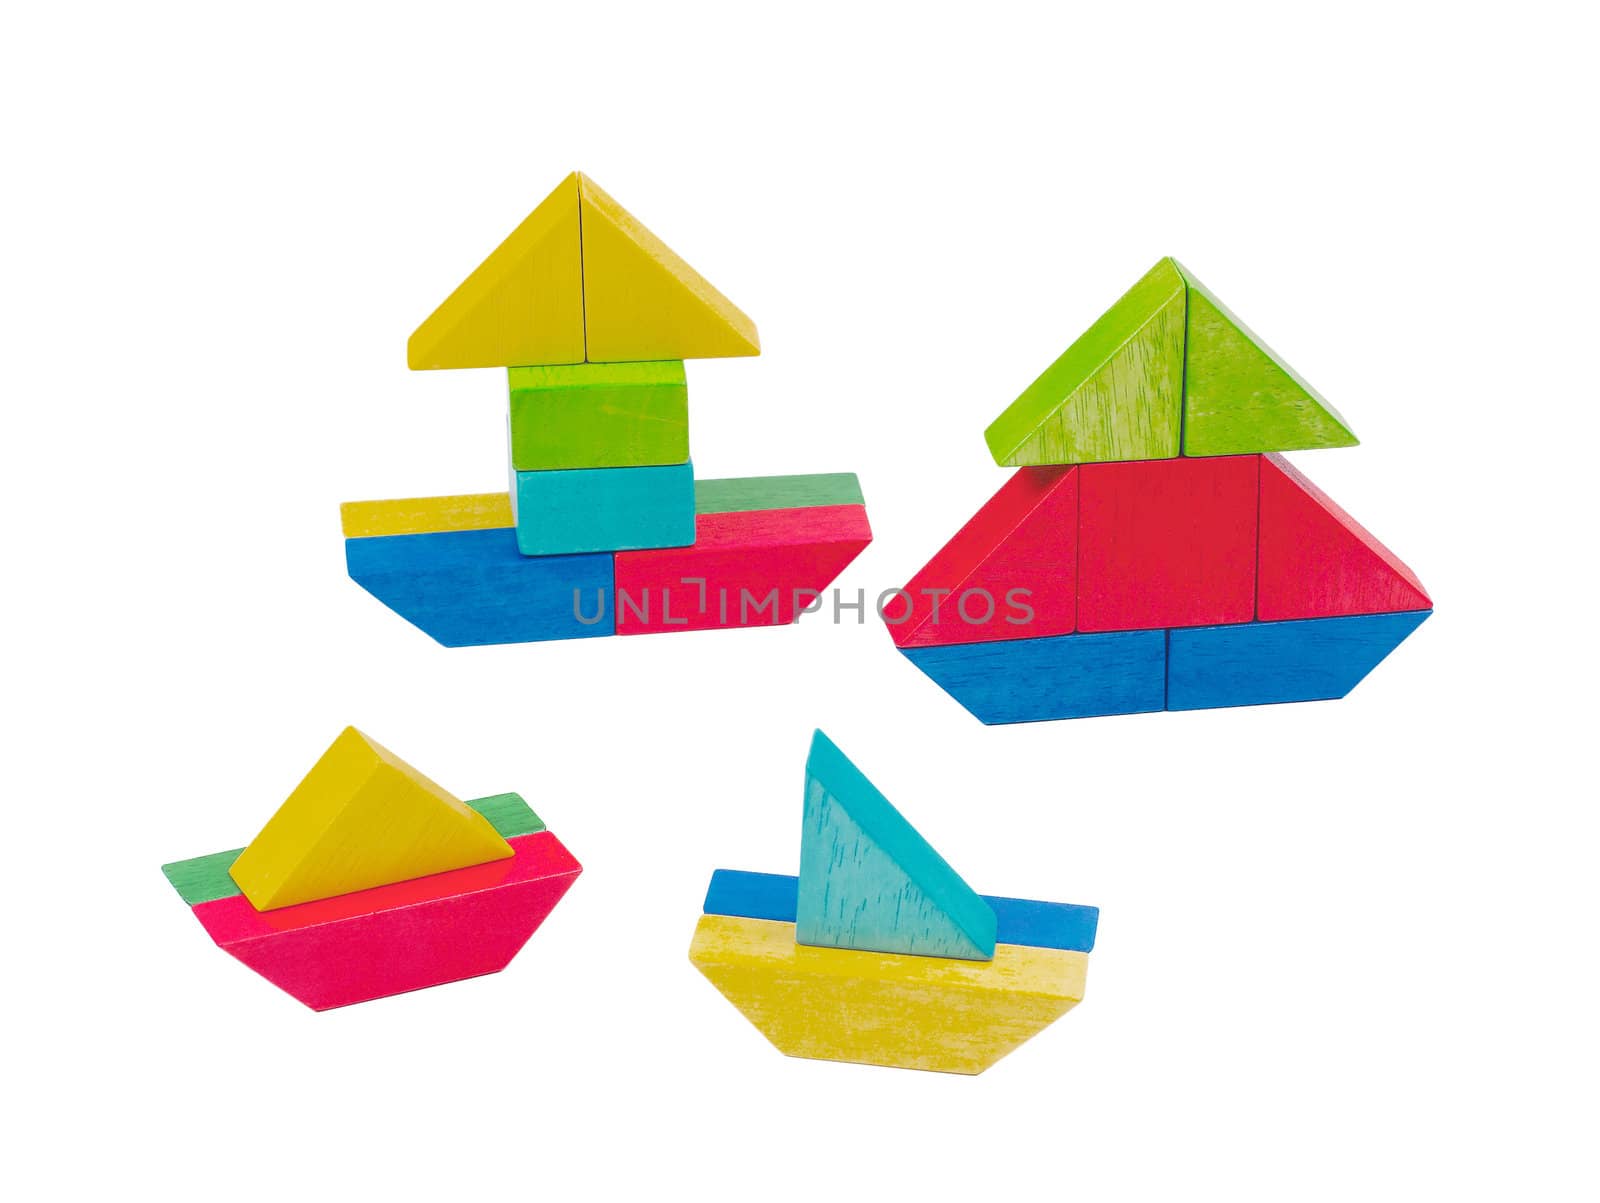 Nice wooden toy boat create from colorful wooden blocks